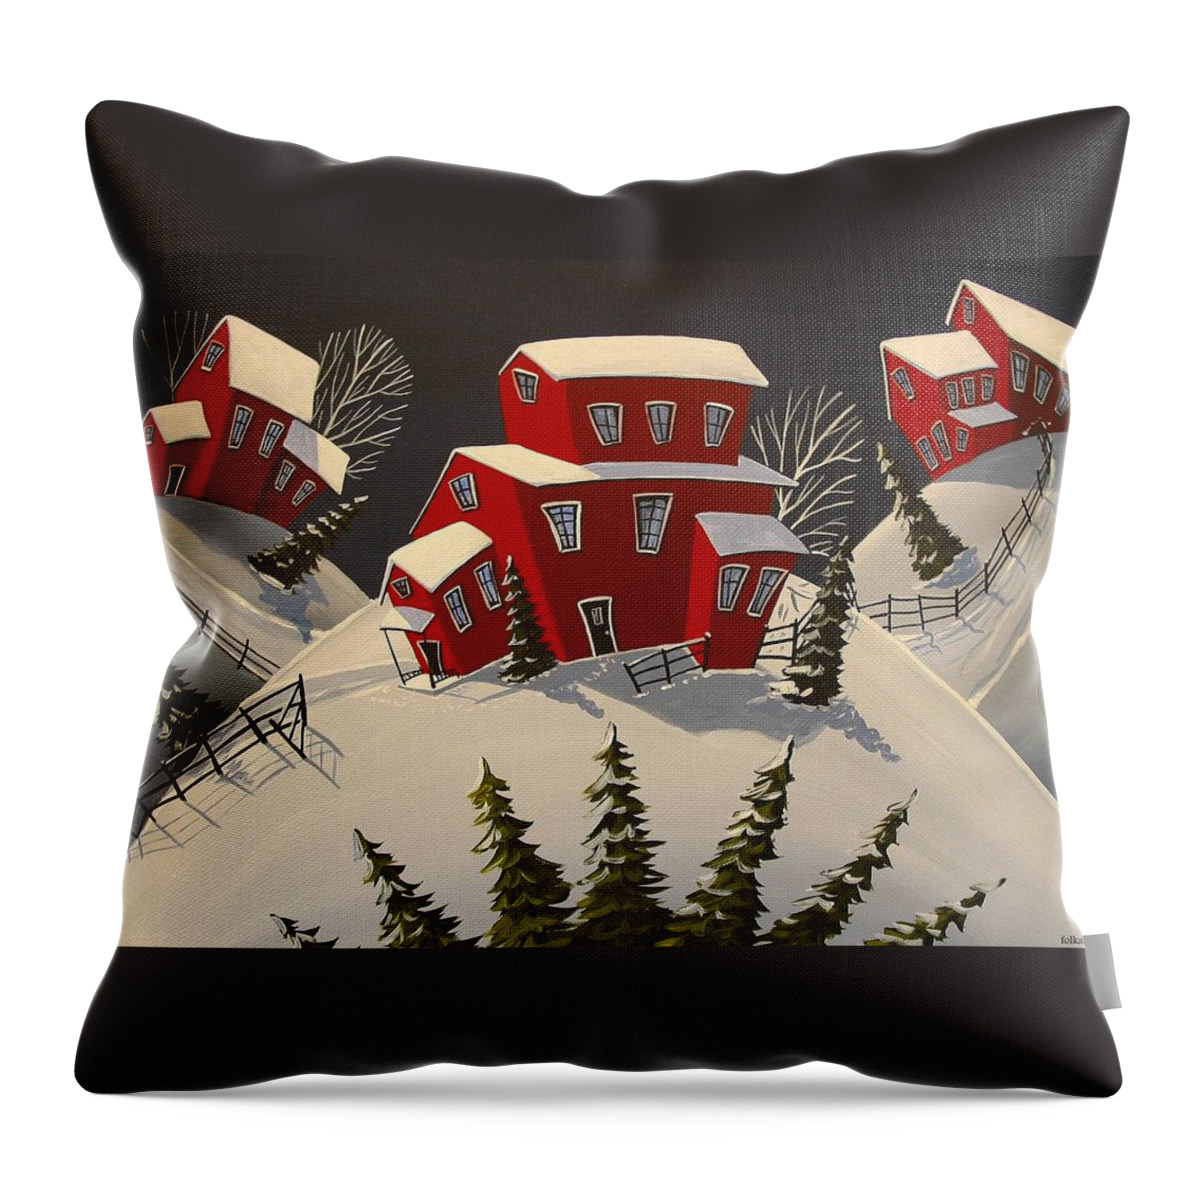 Folk Art Throw Pillow featuring the painting Winter Funky by Debbie Criswell